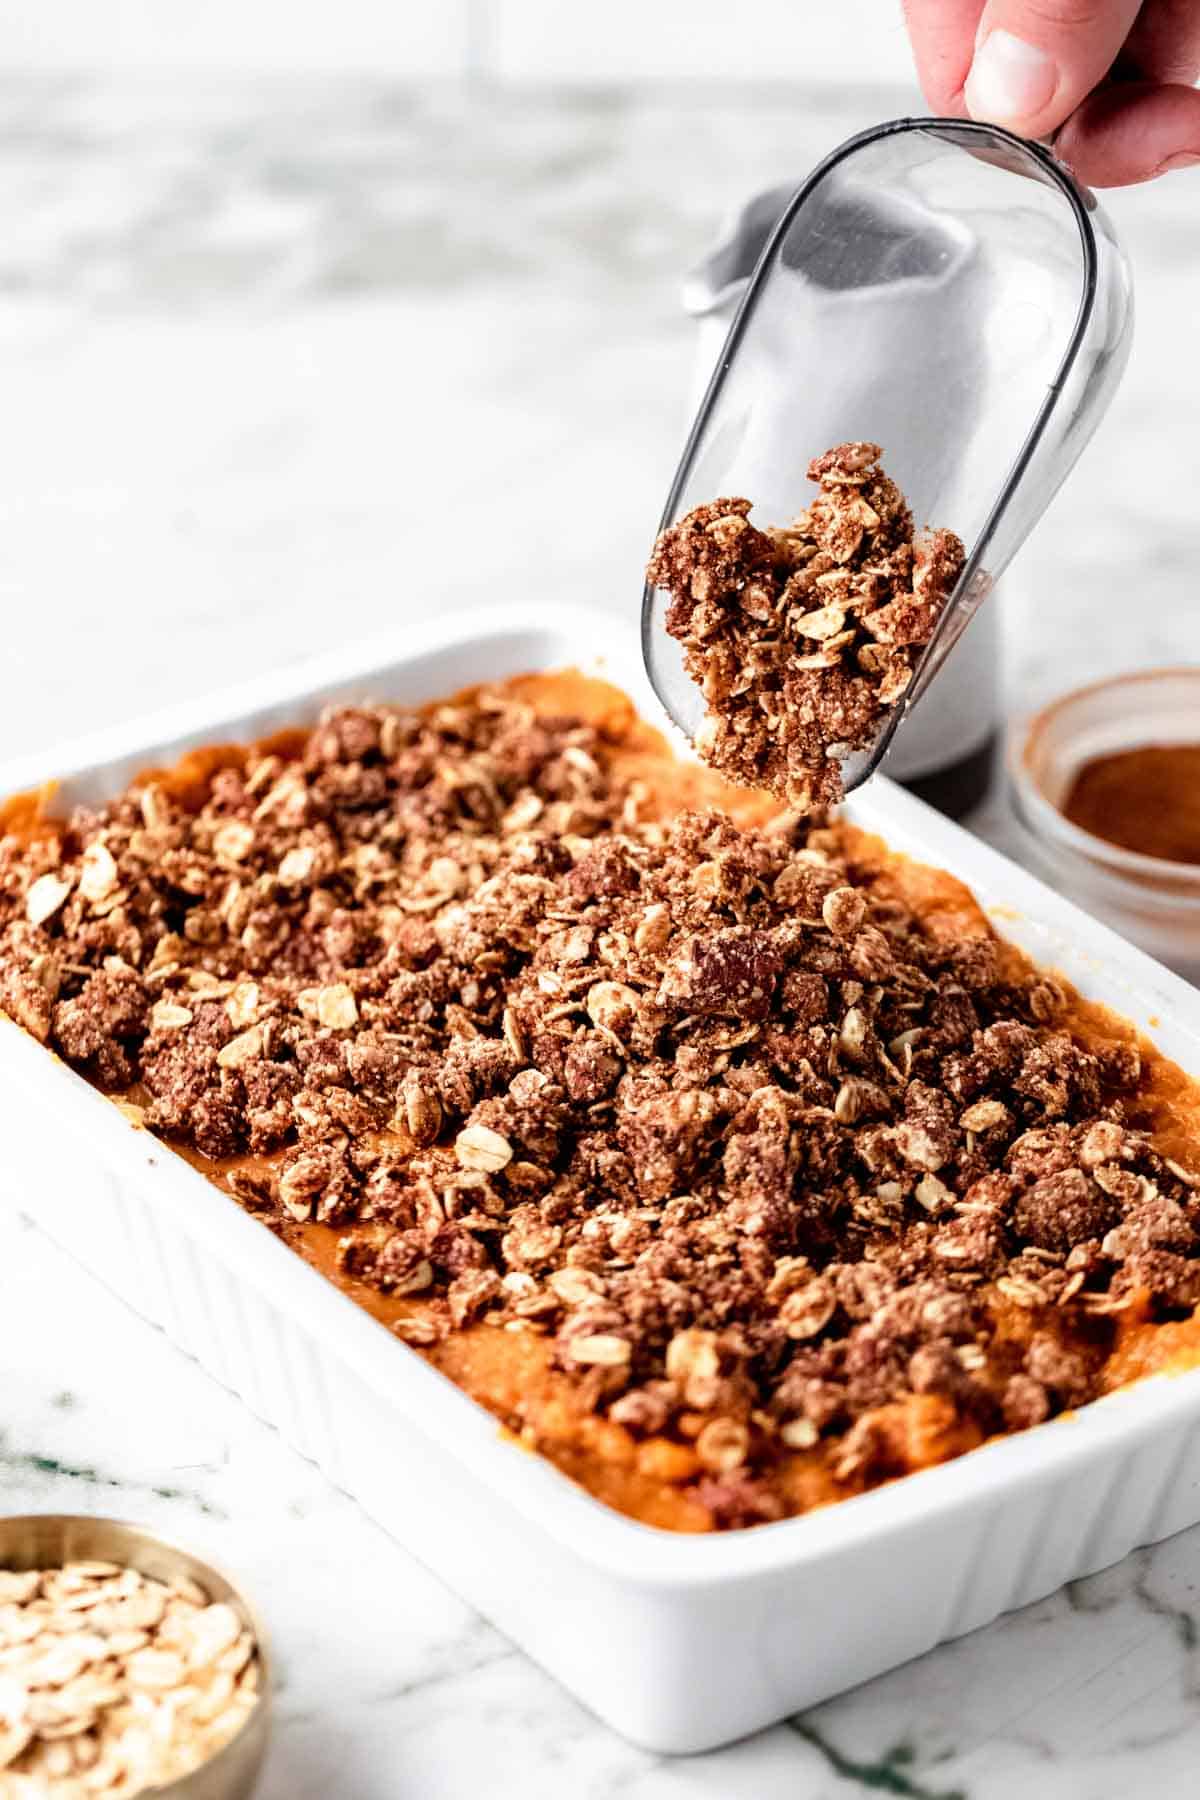 The oat topping is poured over top of a sweet potato casserole in a baking dish.